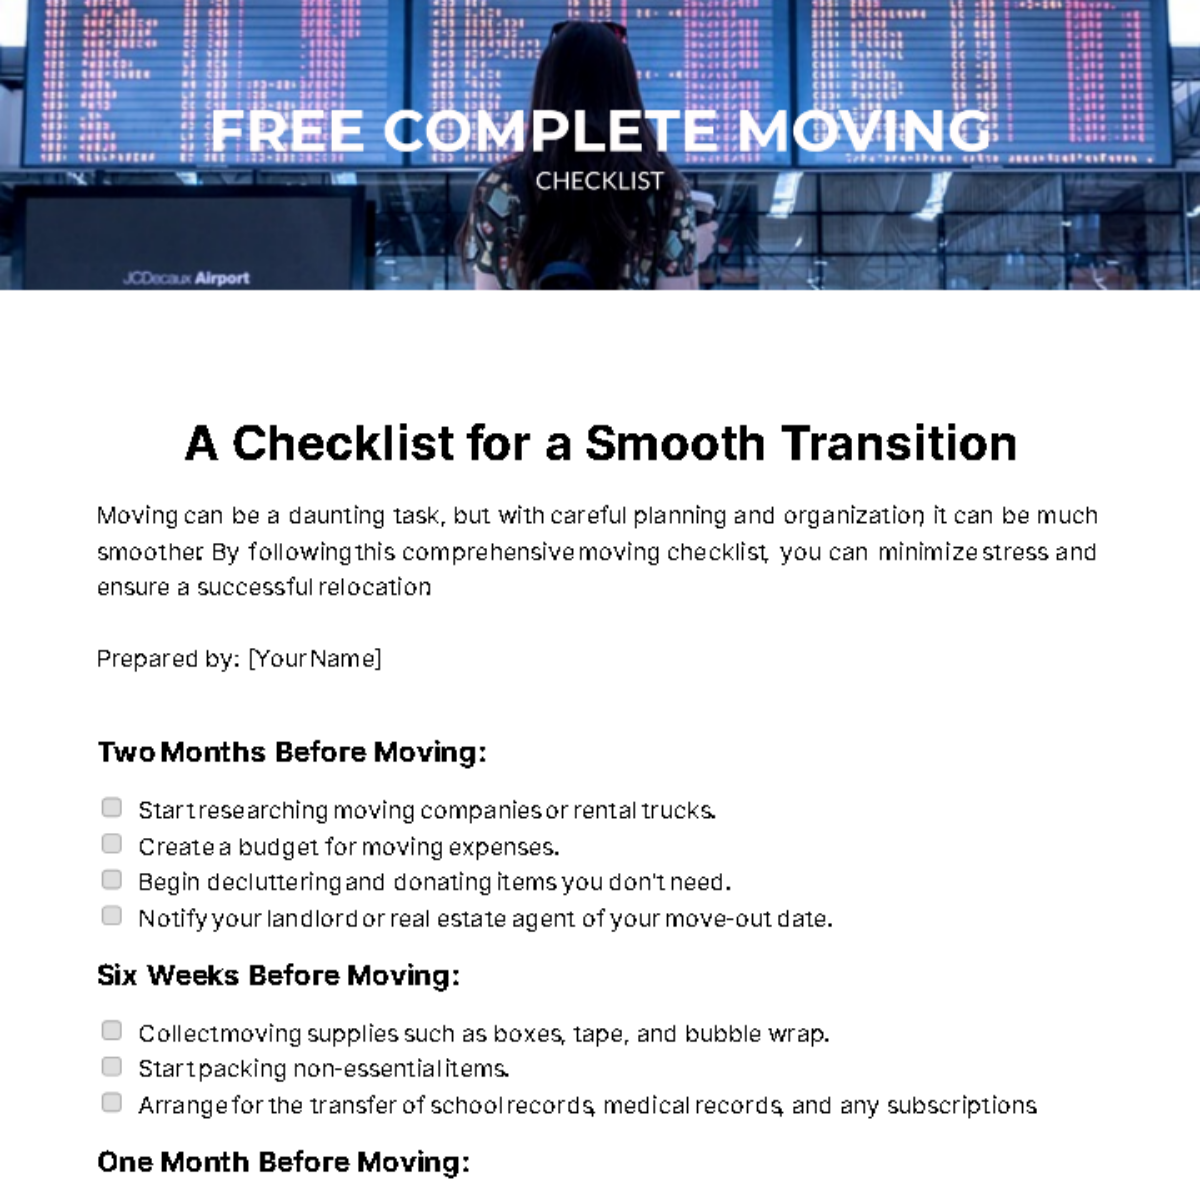 Free Complete Moving Checklist Template